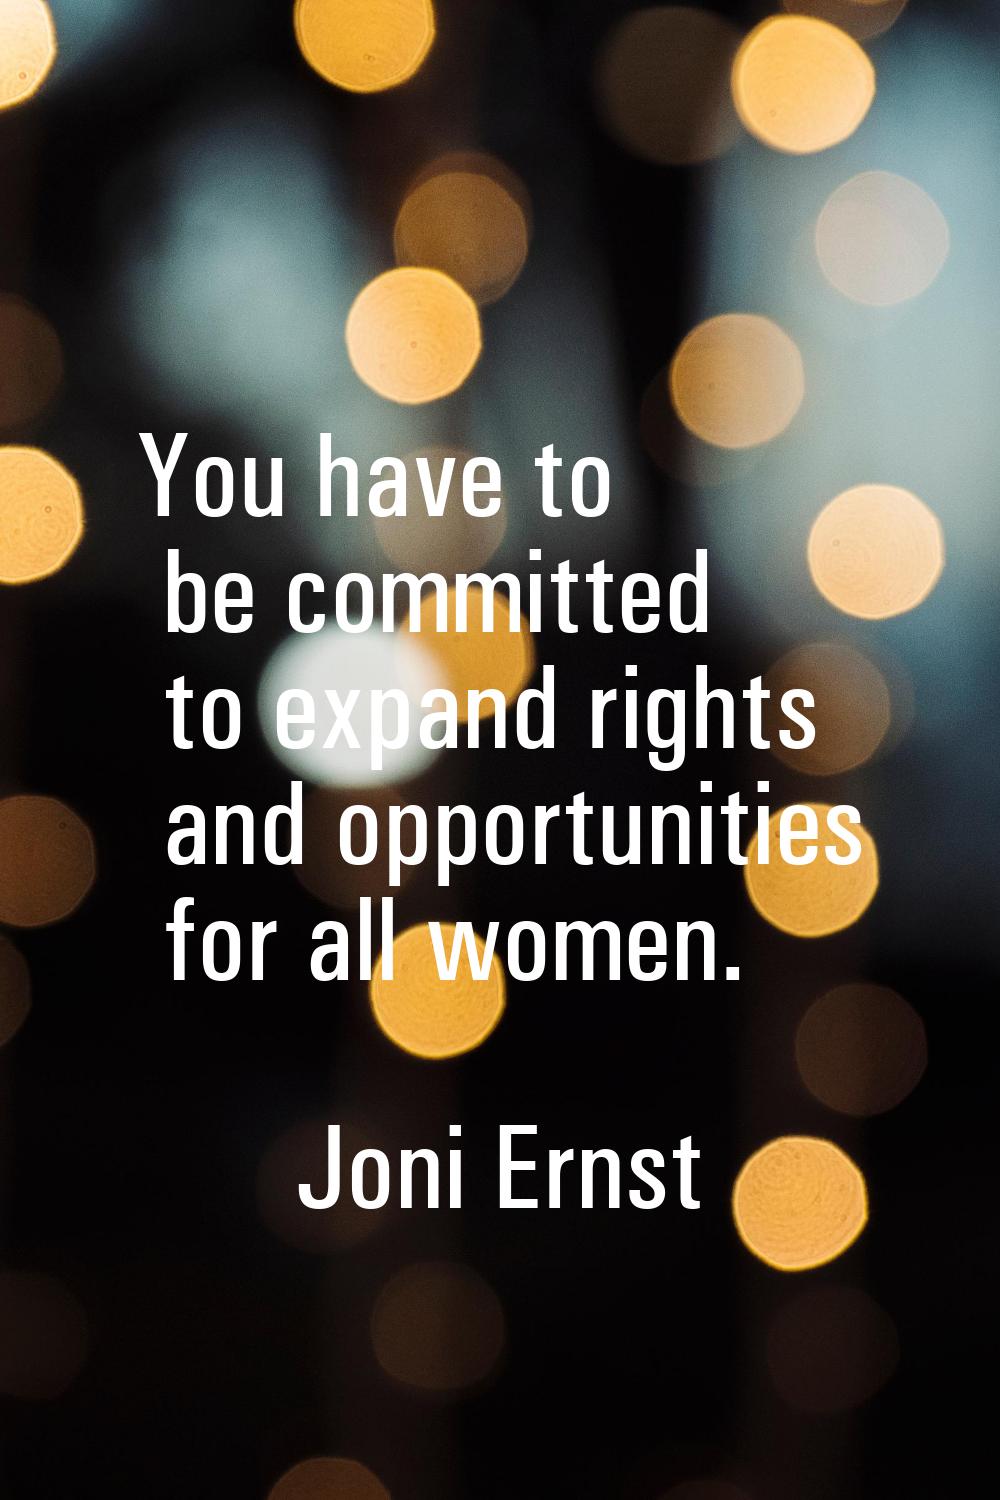 You have to be committed to expand rights and opportunities for all women.